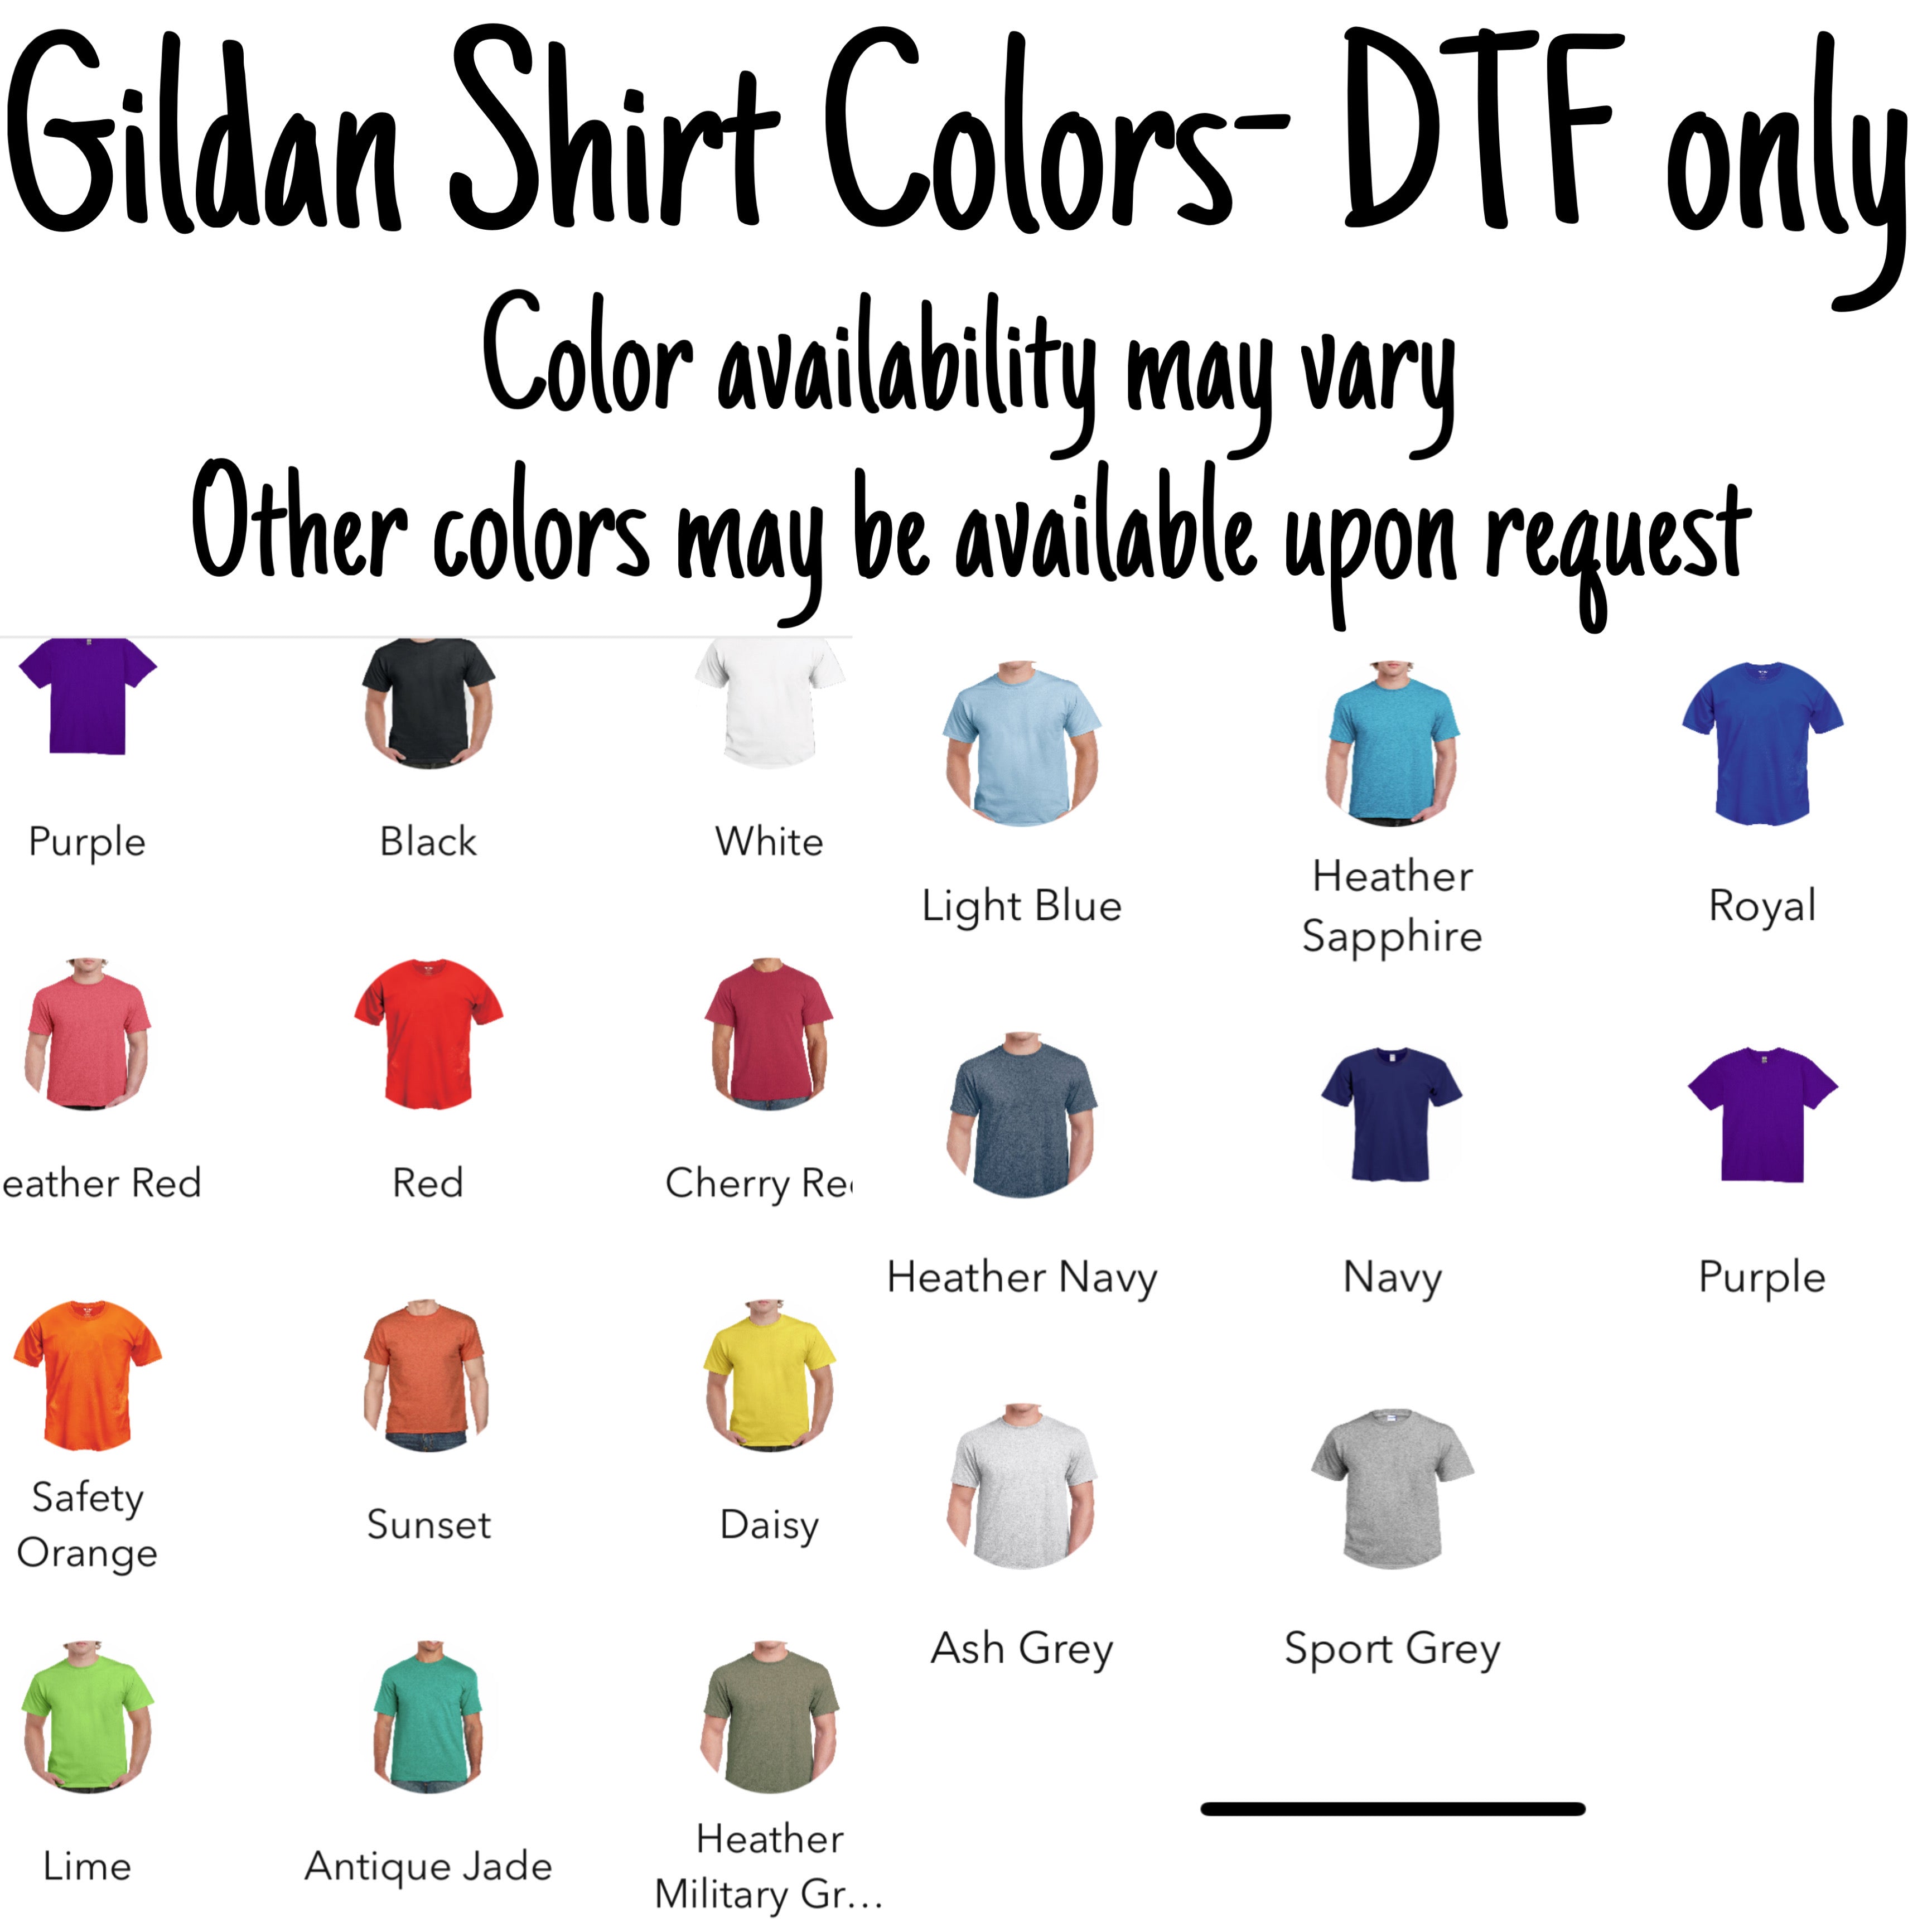 Sweet One Sublimation/ DTF/ BLEACHED Shirts, Onesies, Sweatshirts- MULTIPLE COLORS